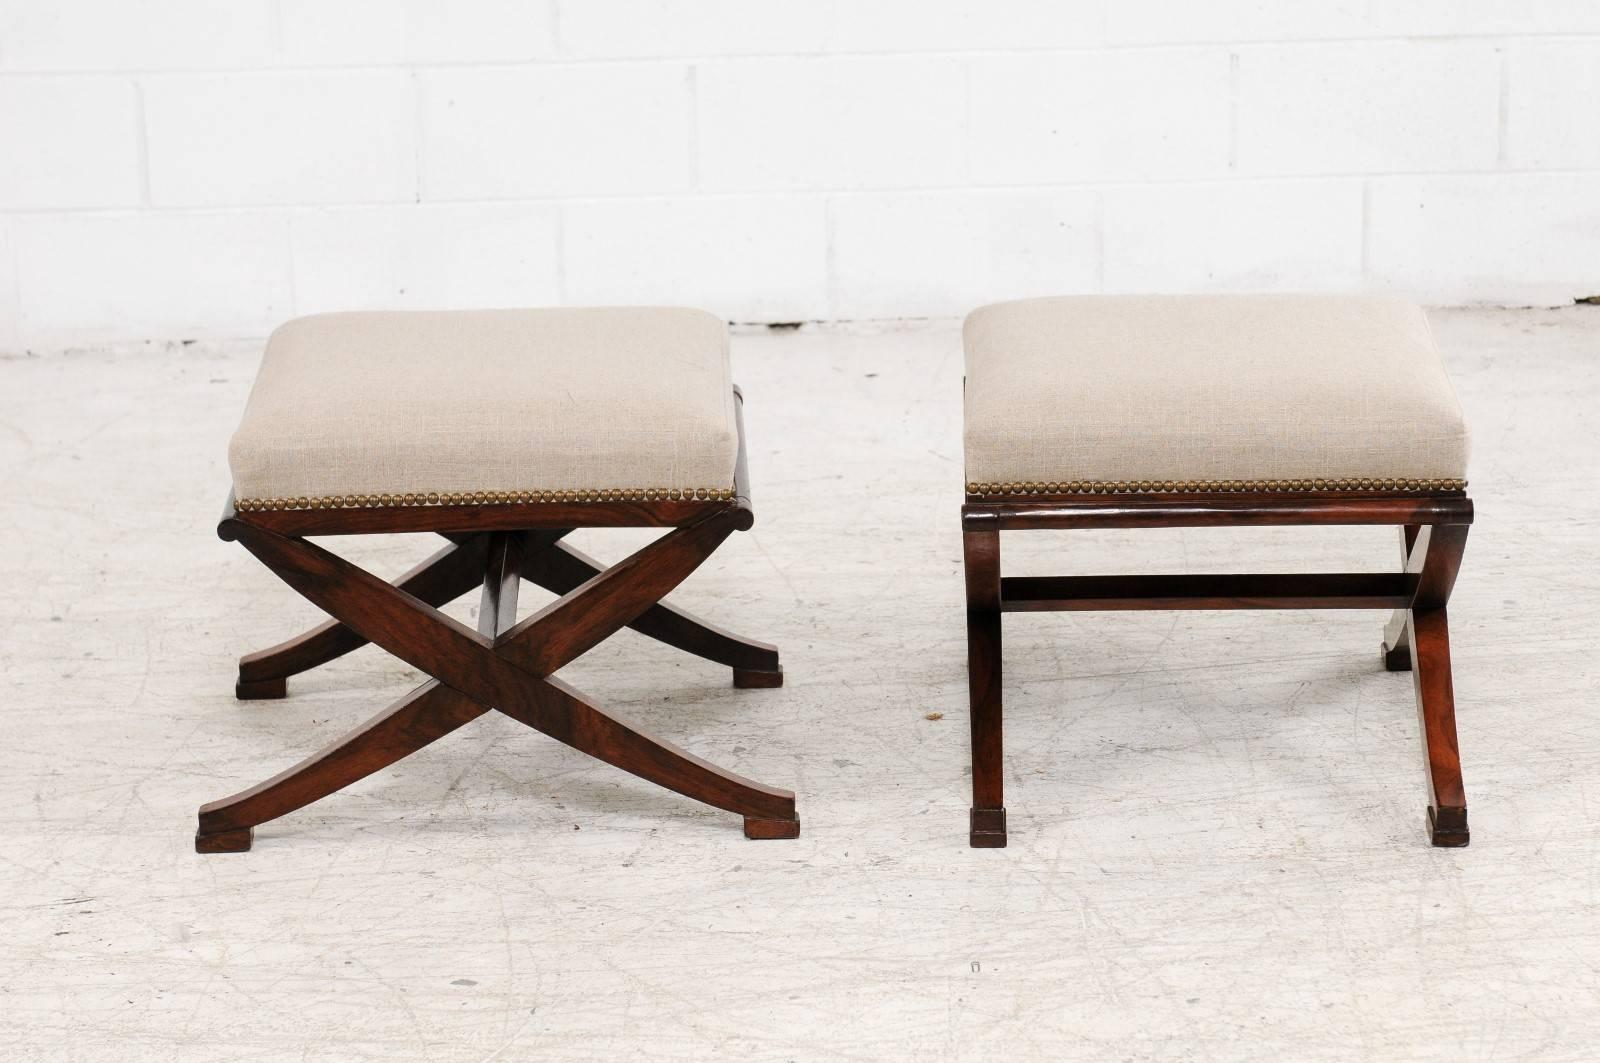 Upholstery Pair of French Mahogany X-Form Stools, circa 1870 with Newly Upholstered Seats